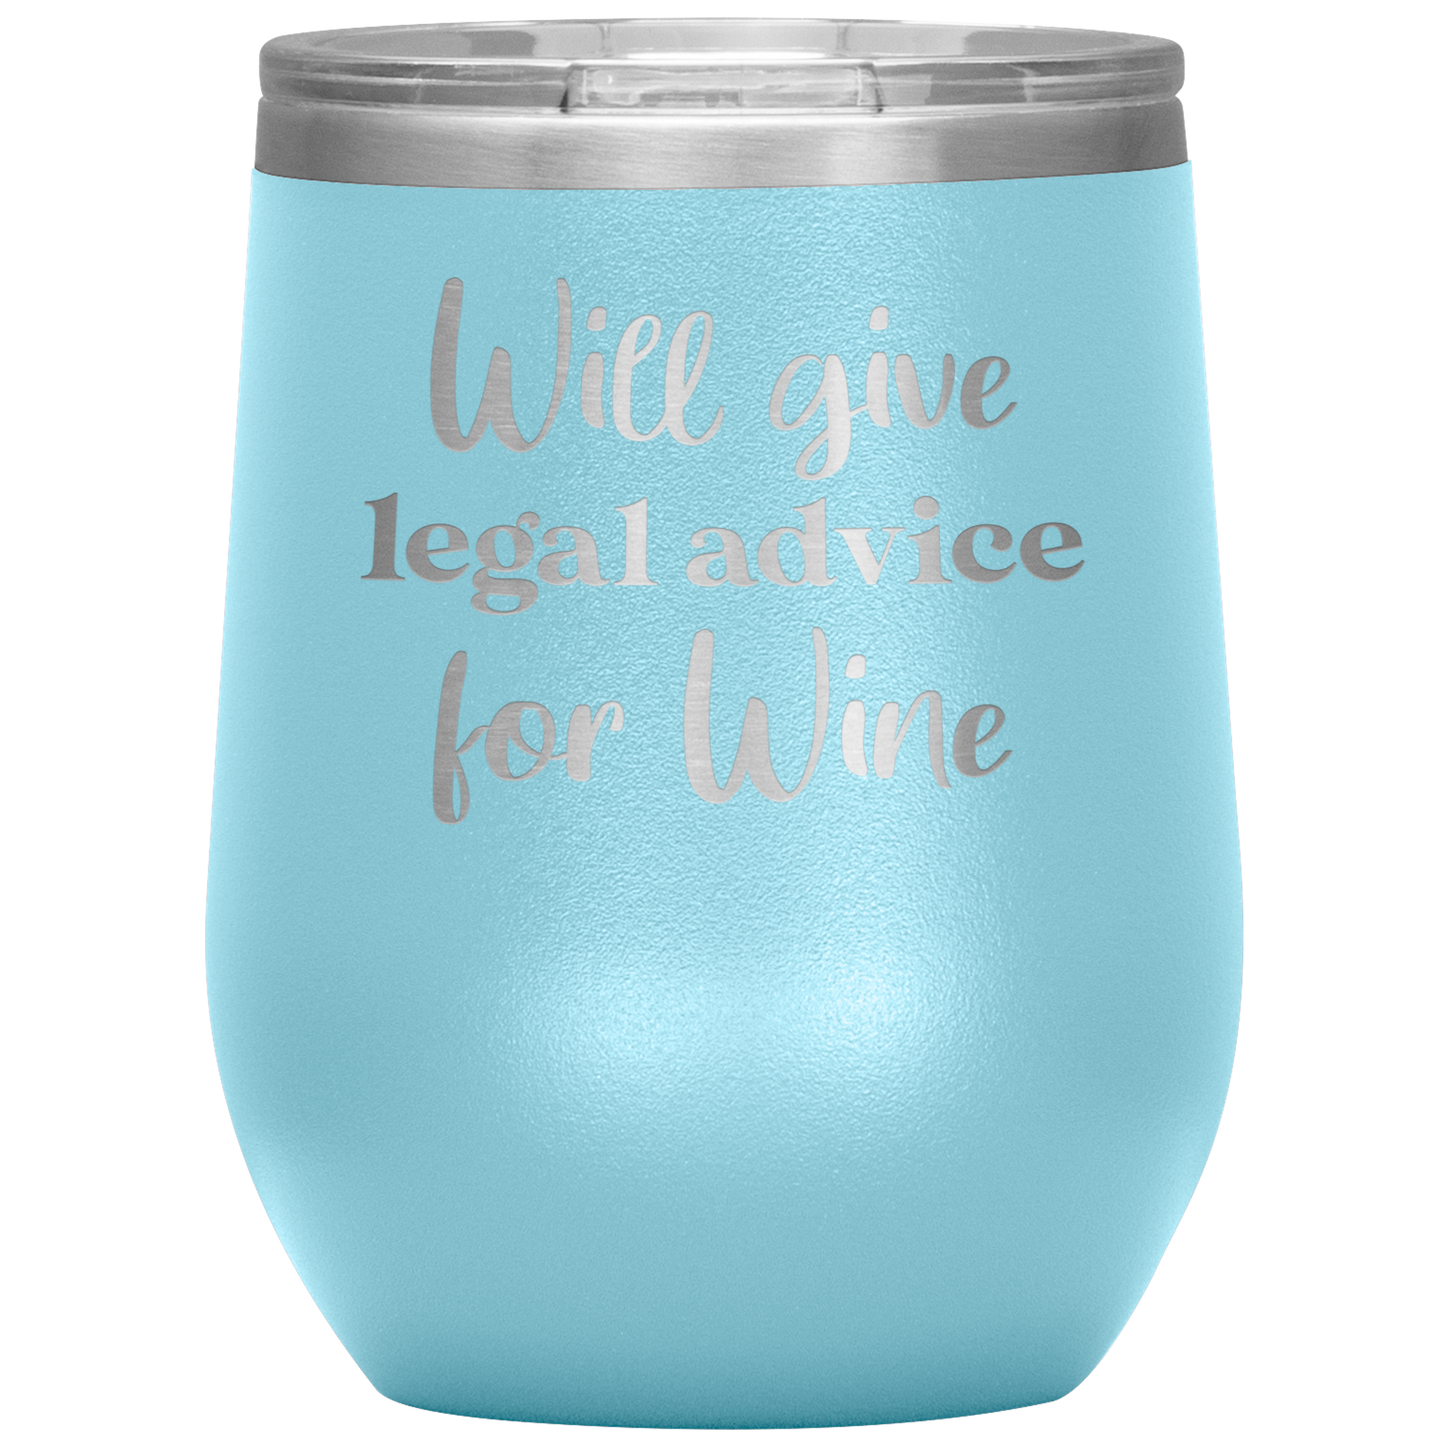 Lawyer Gifts, Will Give Legal Advice for Wine Tumbler Mug Gift Idea Law School Judge Attorney Student Paralegal Graduation Prosecutor - Starcove Design